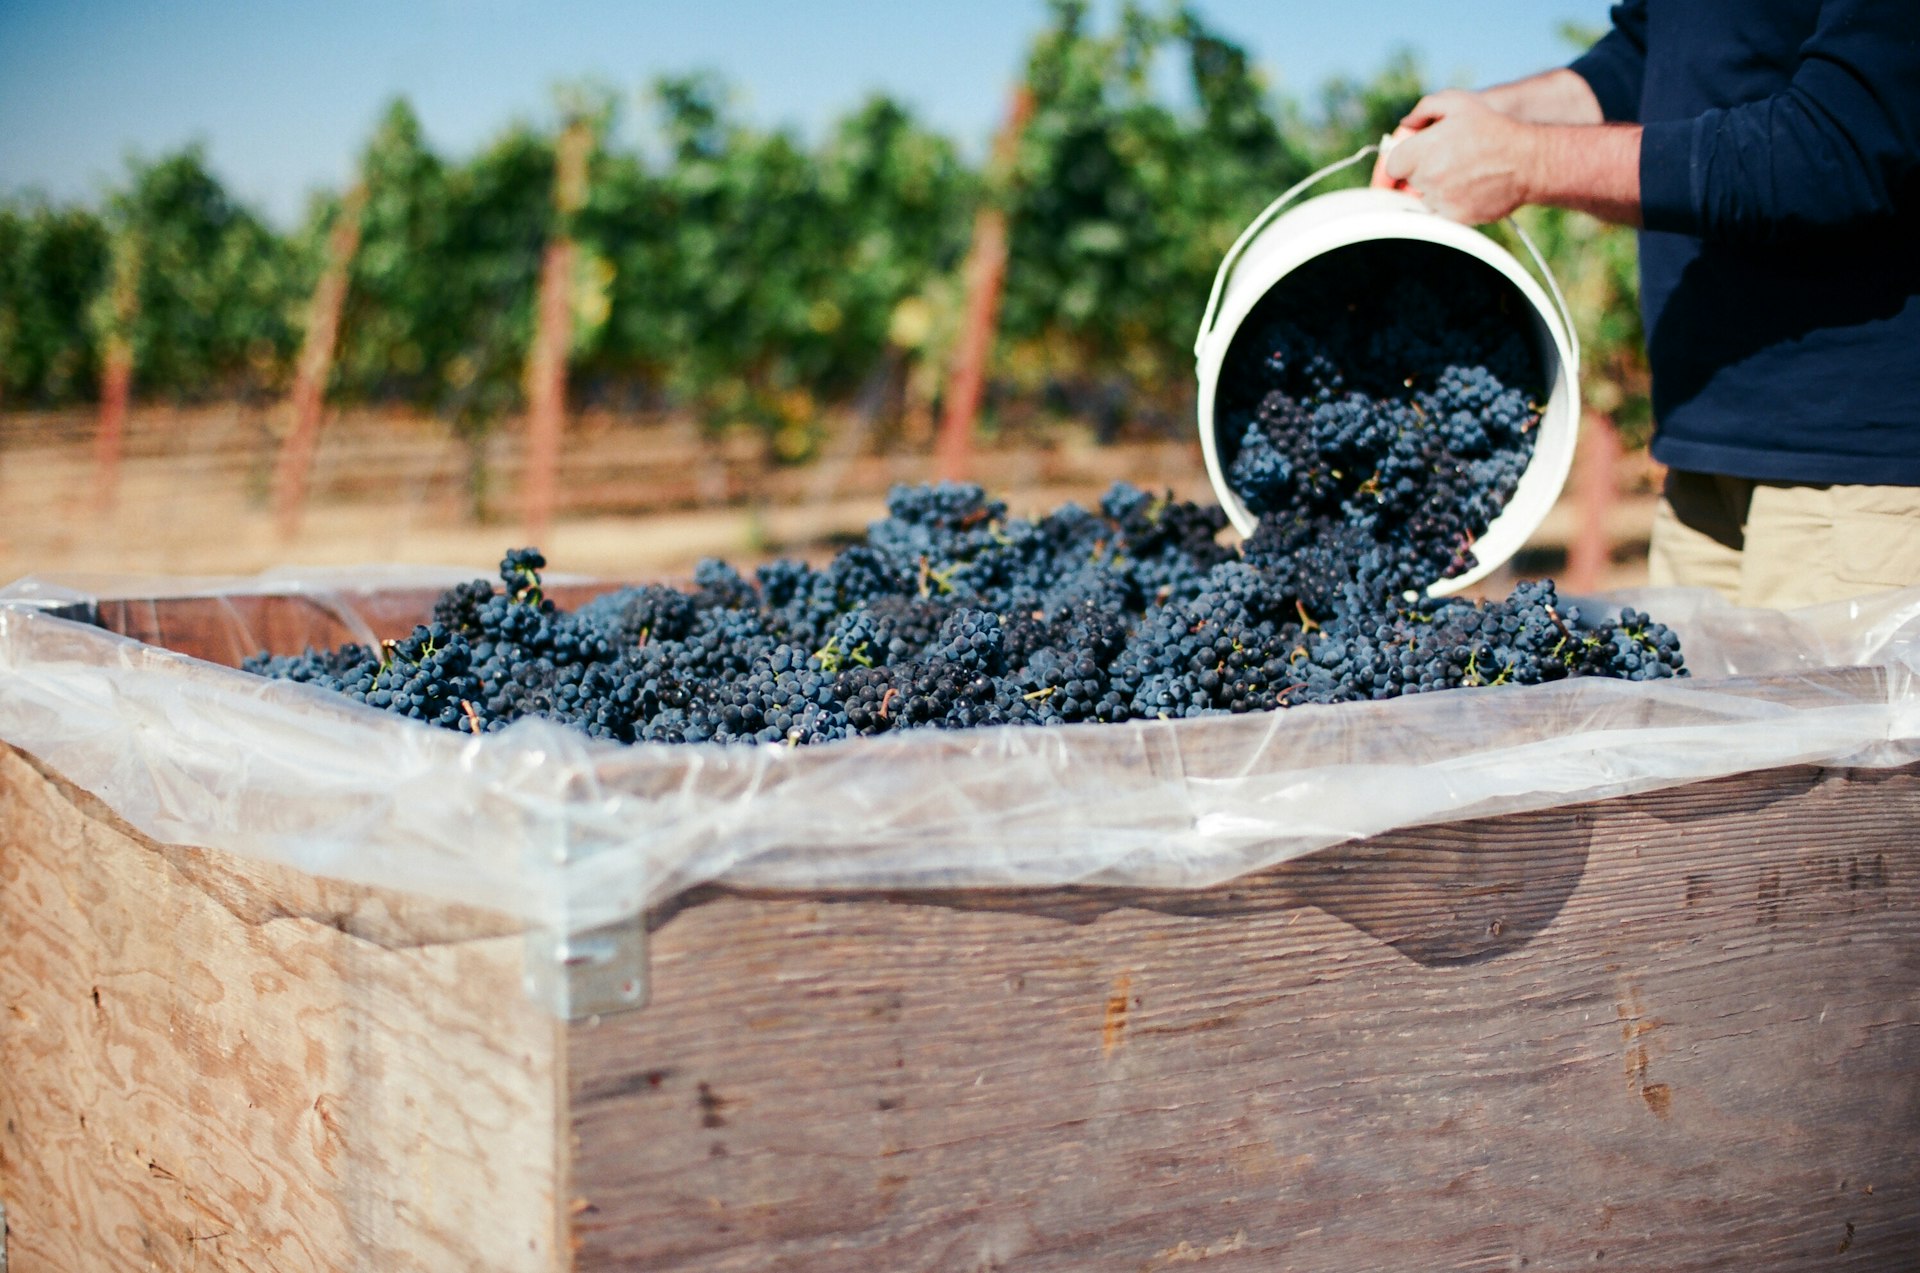 These are Pinot Noir clusters being harvested in the Eola-Amity Hills of Oregon's Willamette Valley